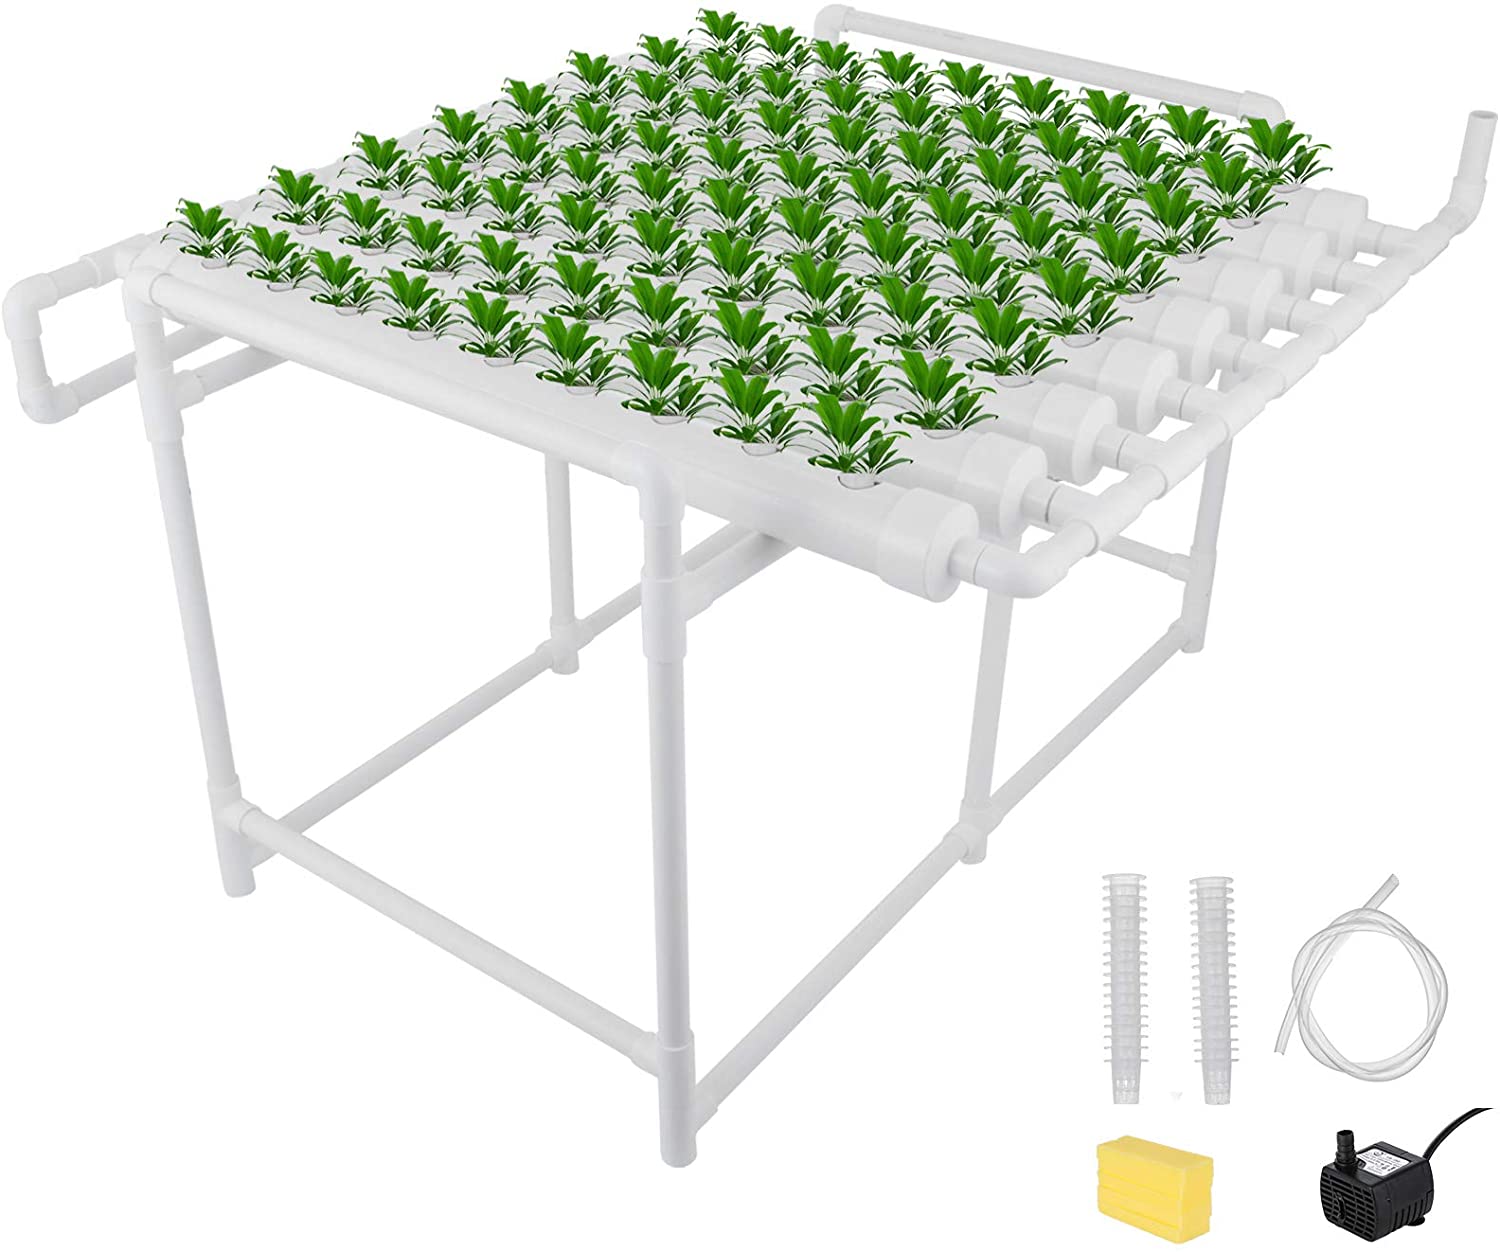 ECO Farm 1 Layer 8 Pipes 72 Sites NFT Hydroponic Growing System-growpackage.com